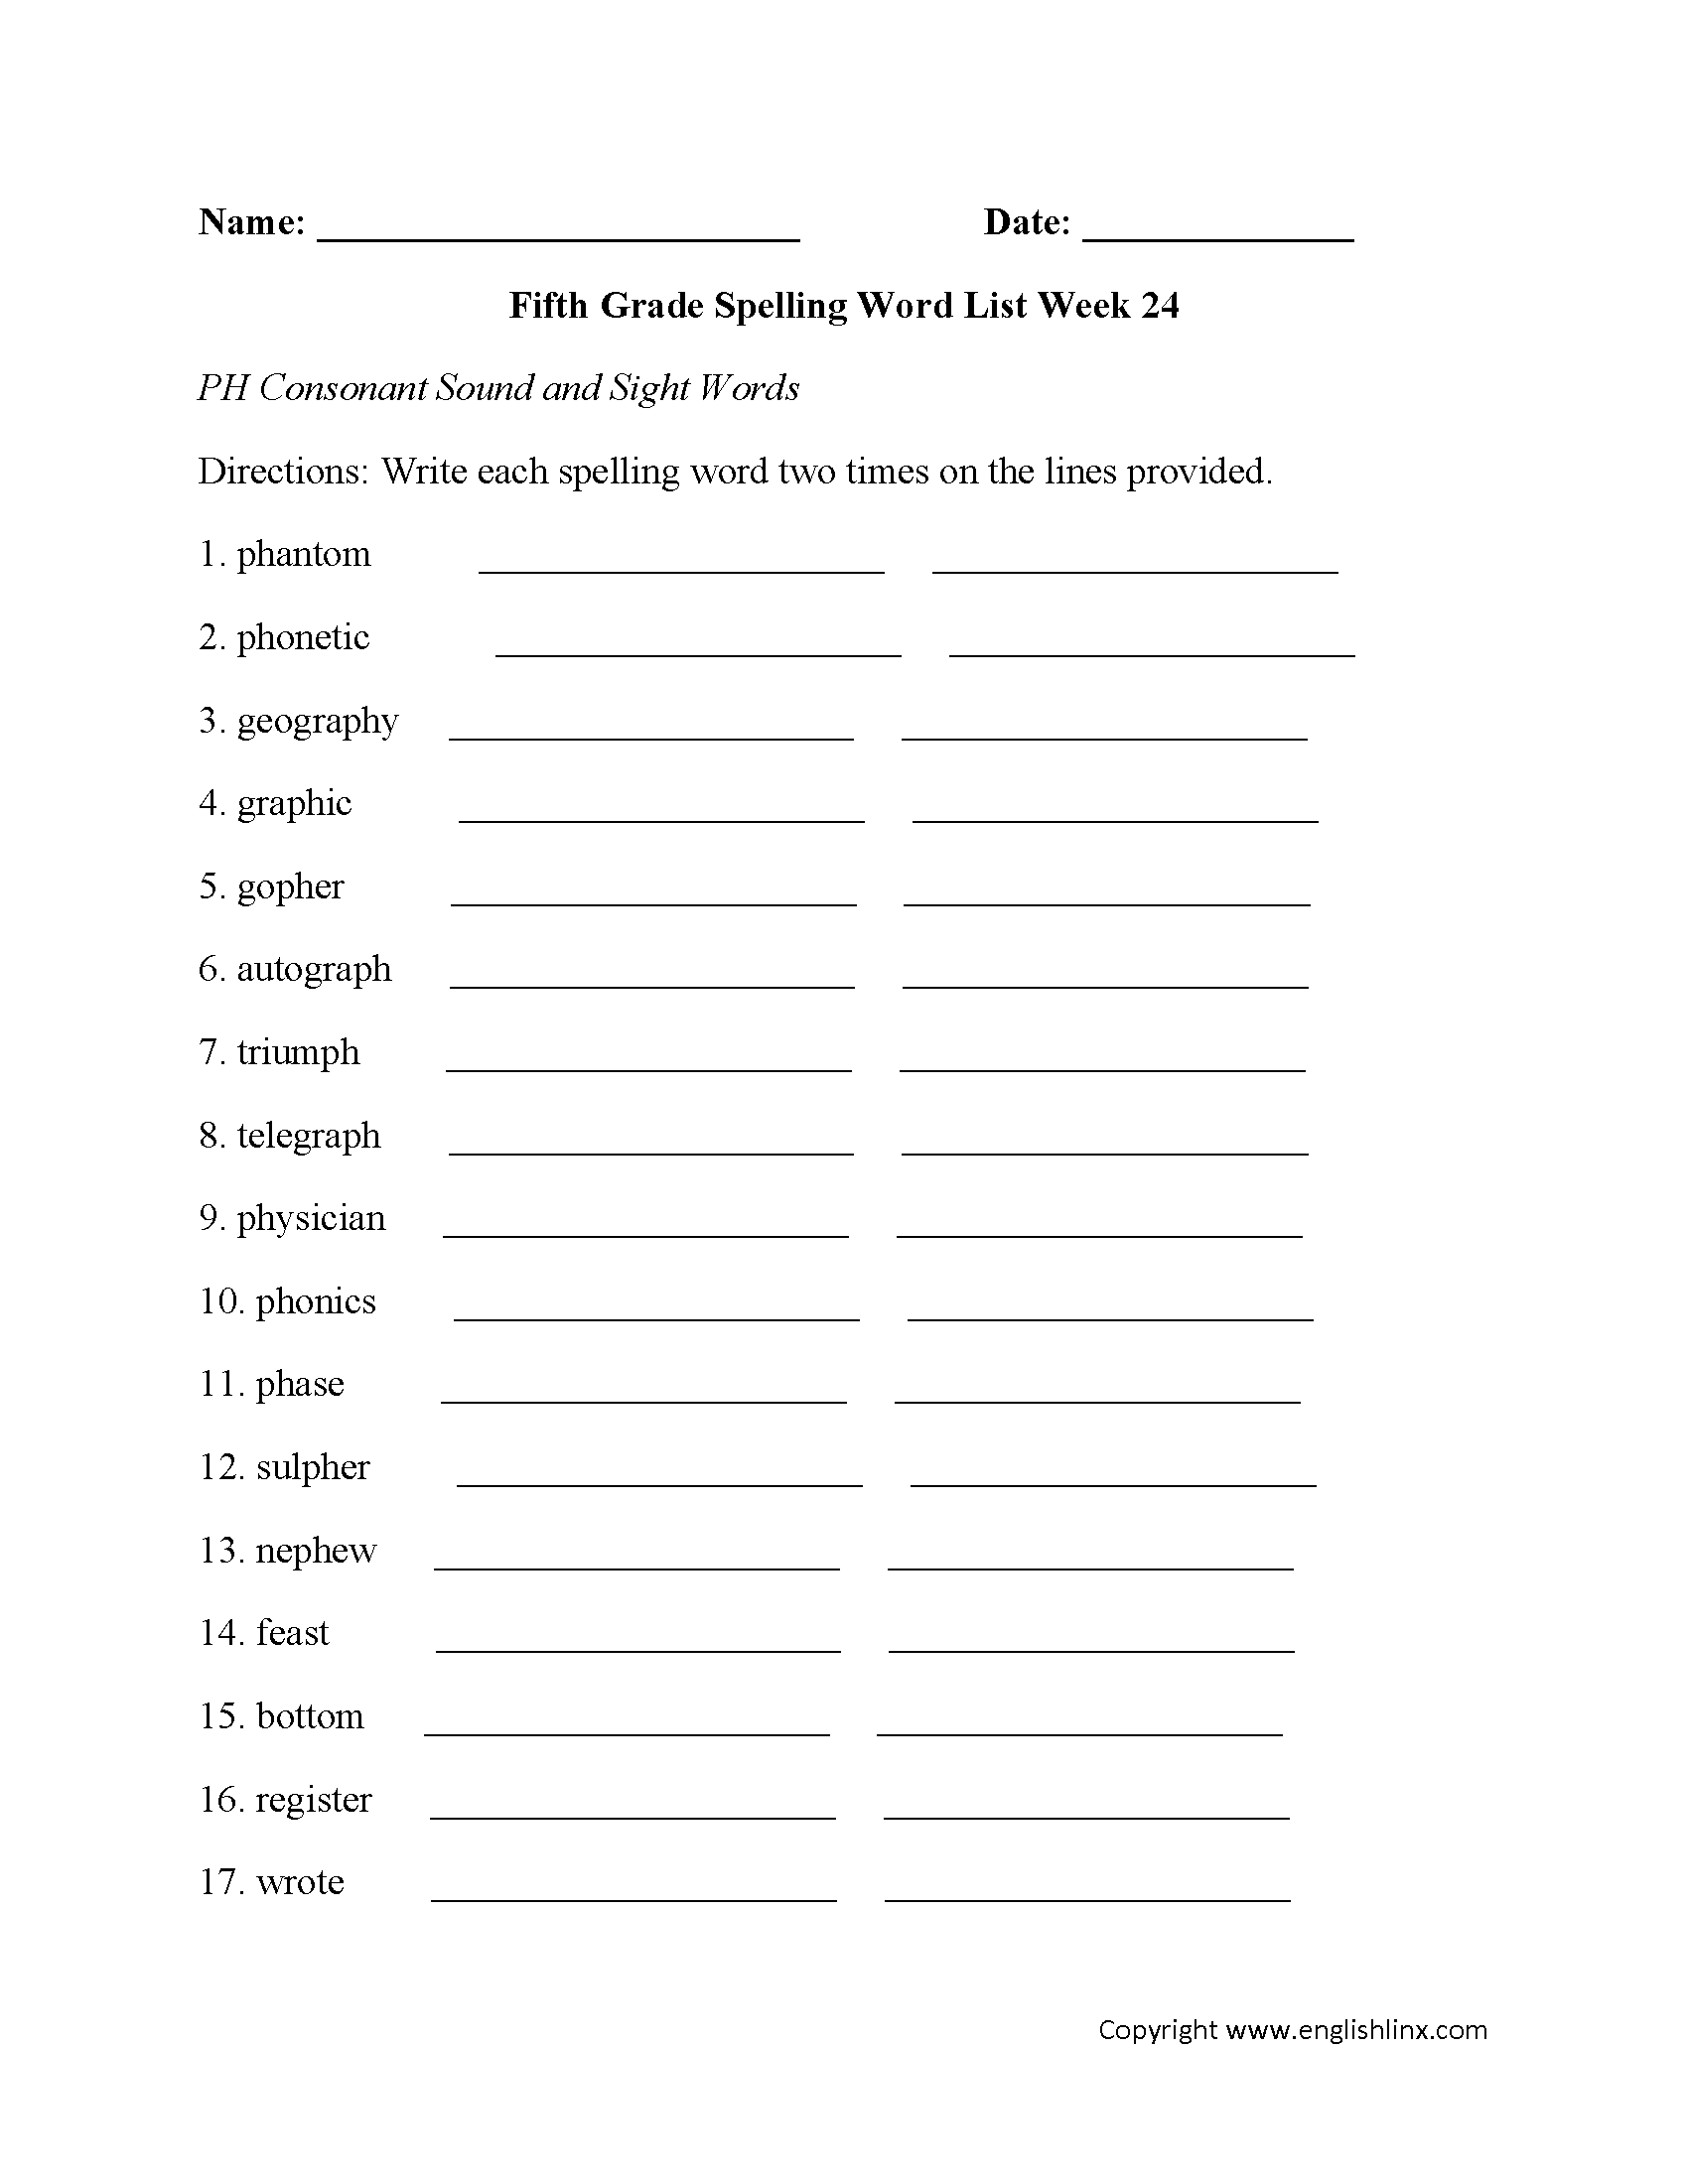 Week 24 PH Consonant and Sight Words Fifth Grade Spelling Words Worksheets